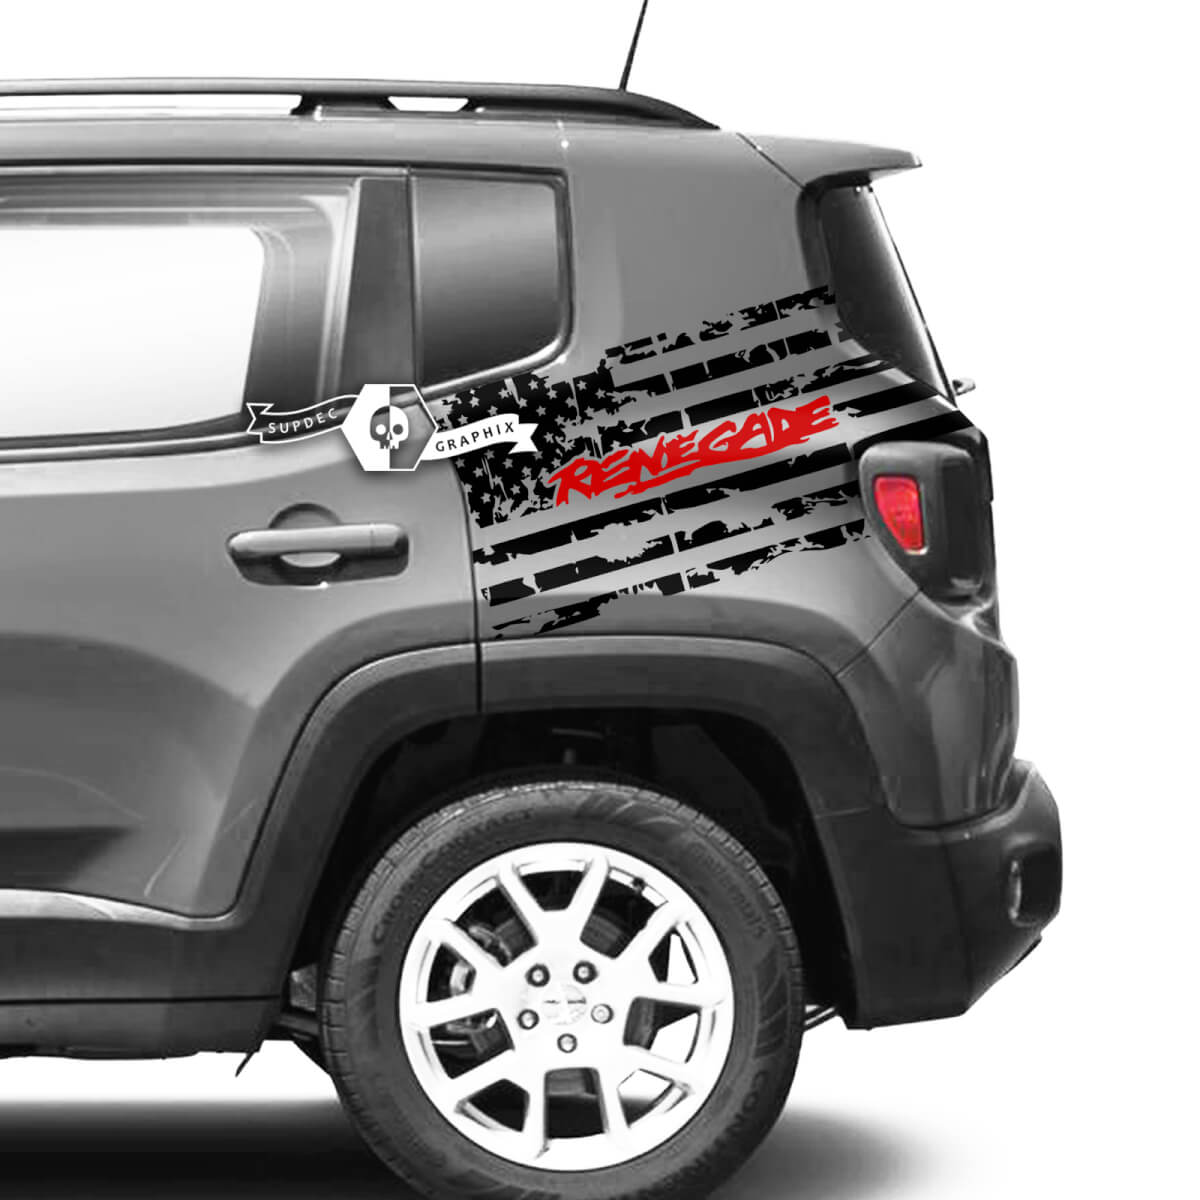 Pair Jeep Renegade Rear Fender USA Flag Destroyed Graphic Vinyl Decal Sticker 2 Colors
